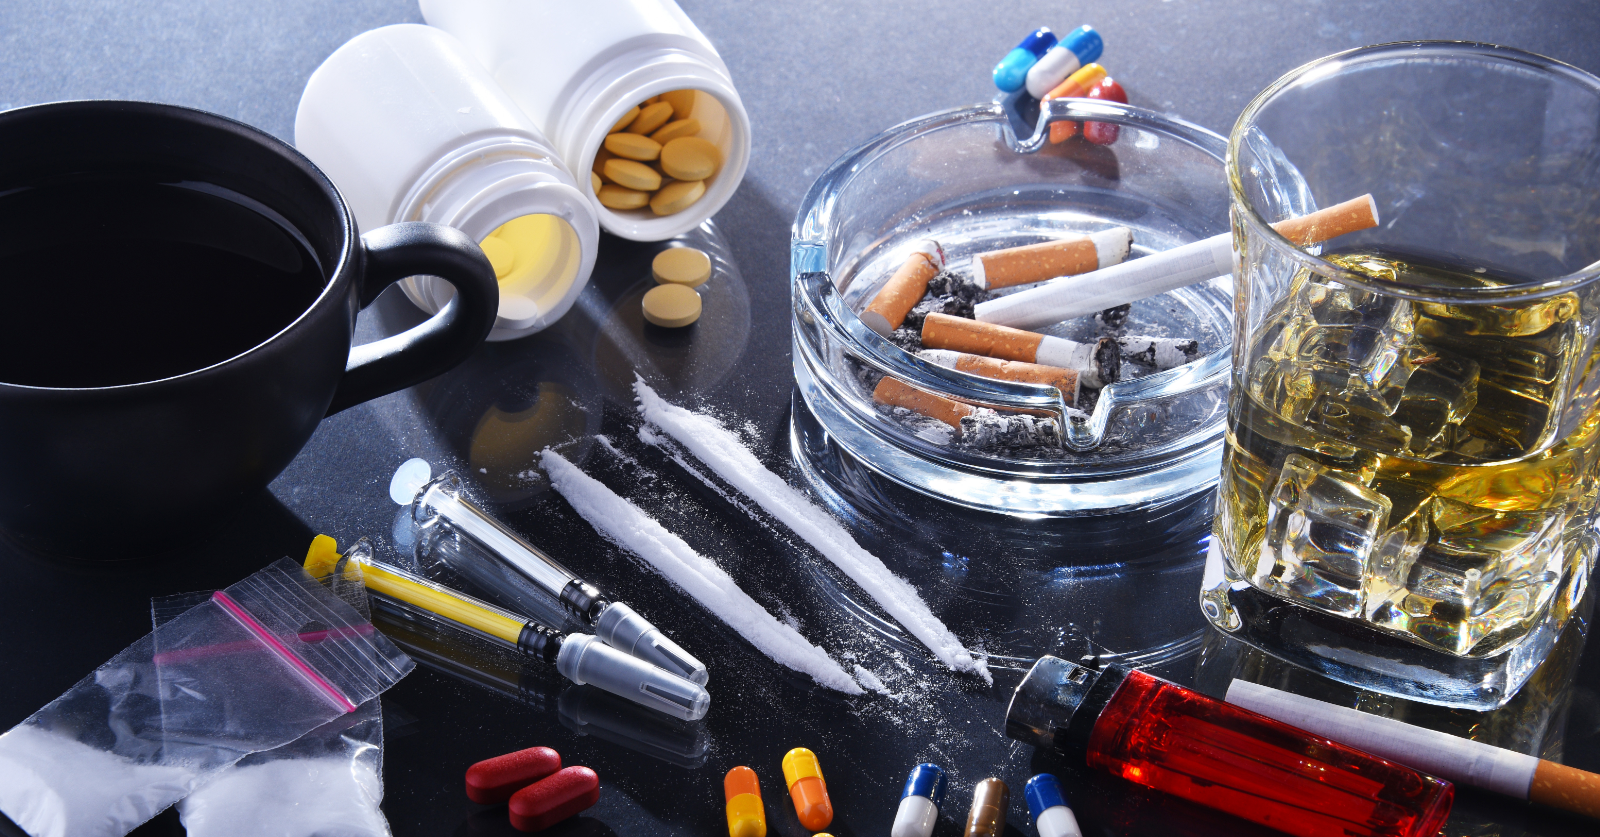 Addiction epidemic: Only 25% of 48 million Americans receive much-needed treatment